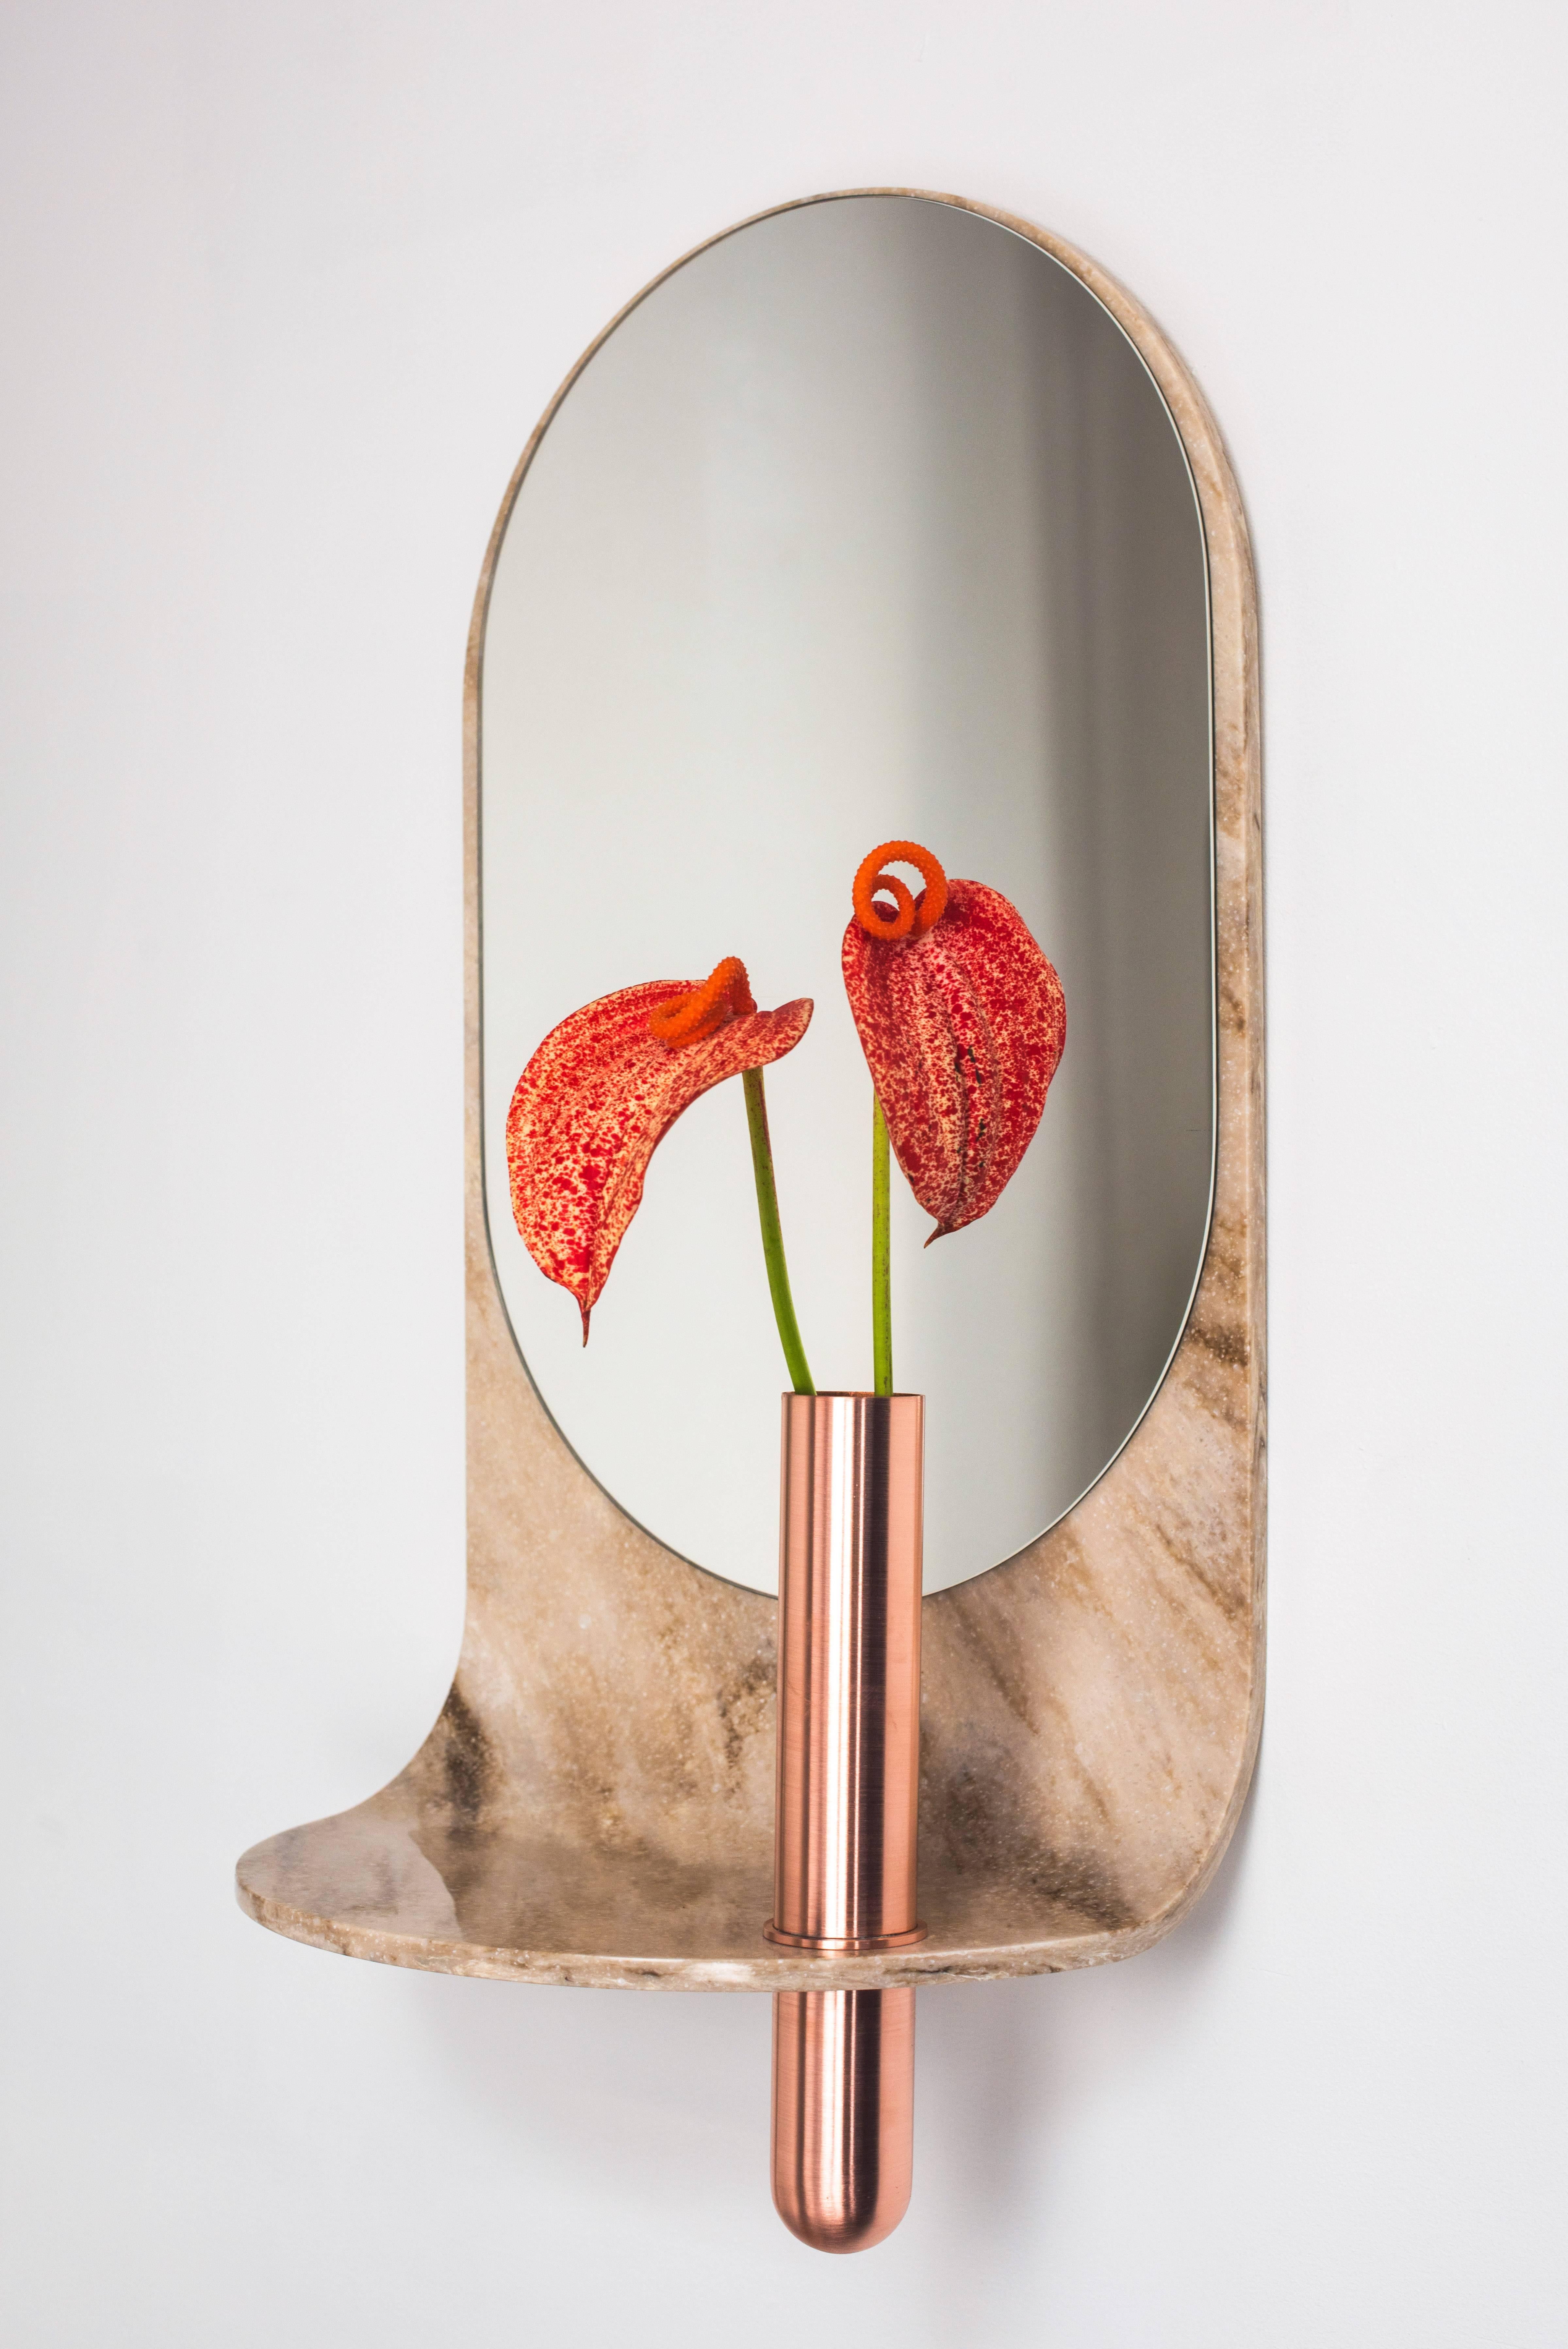 American Swoop Mirror in Curved Stone with Copper Vase by Birnam Wood Studio